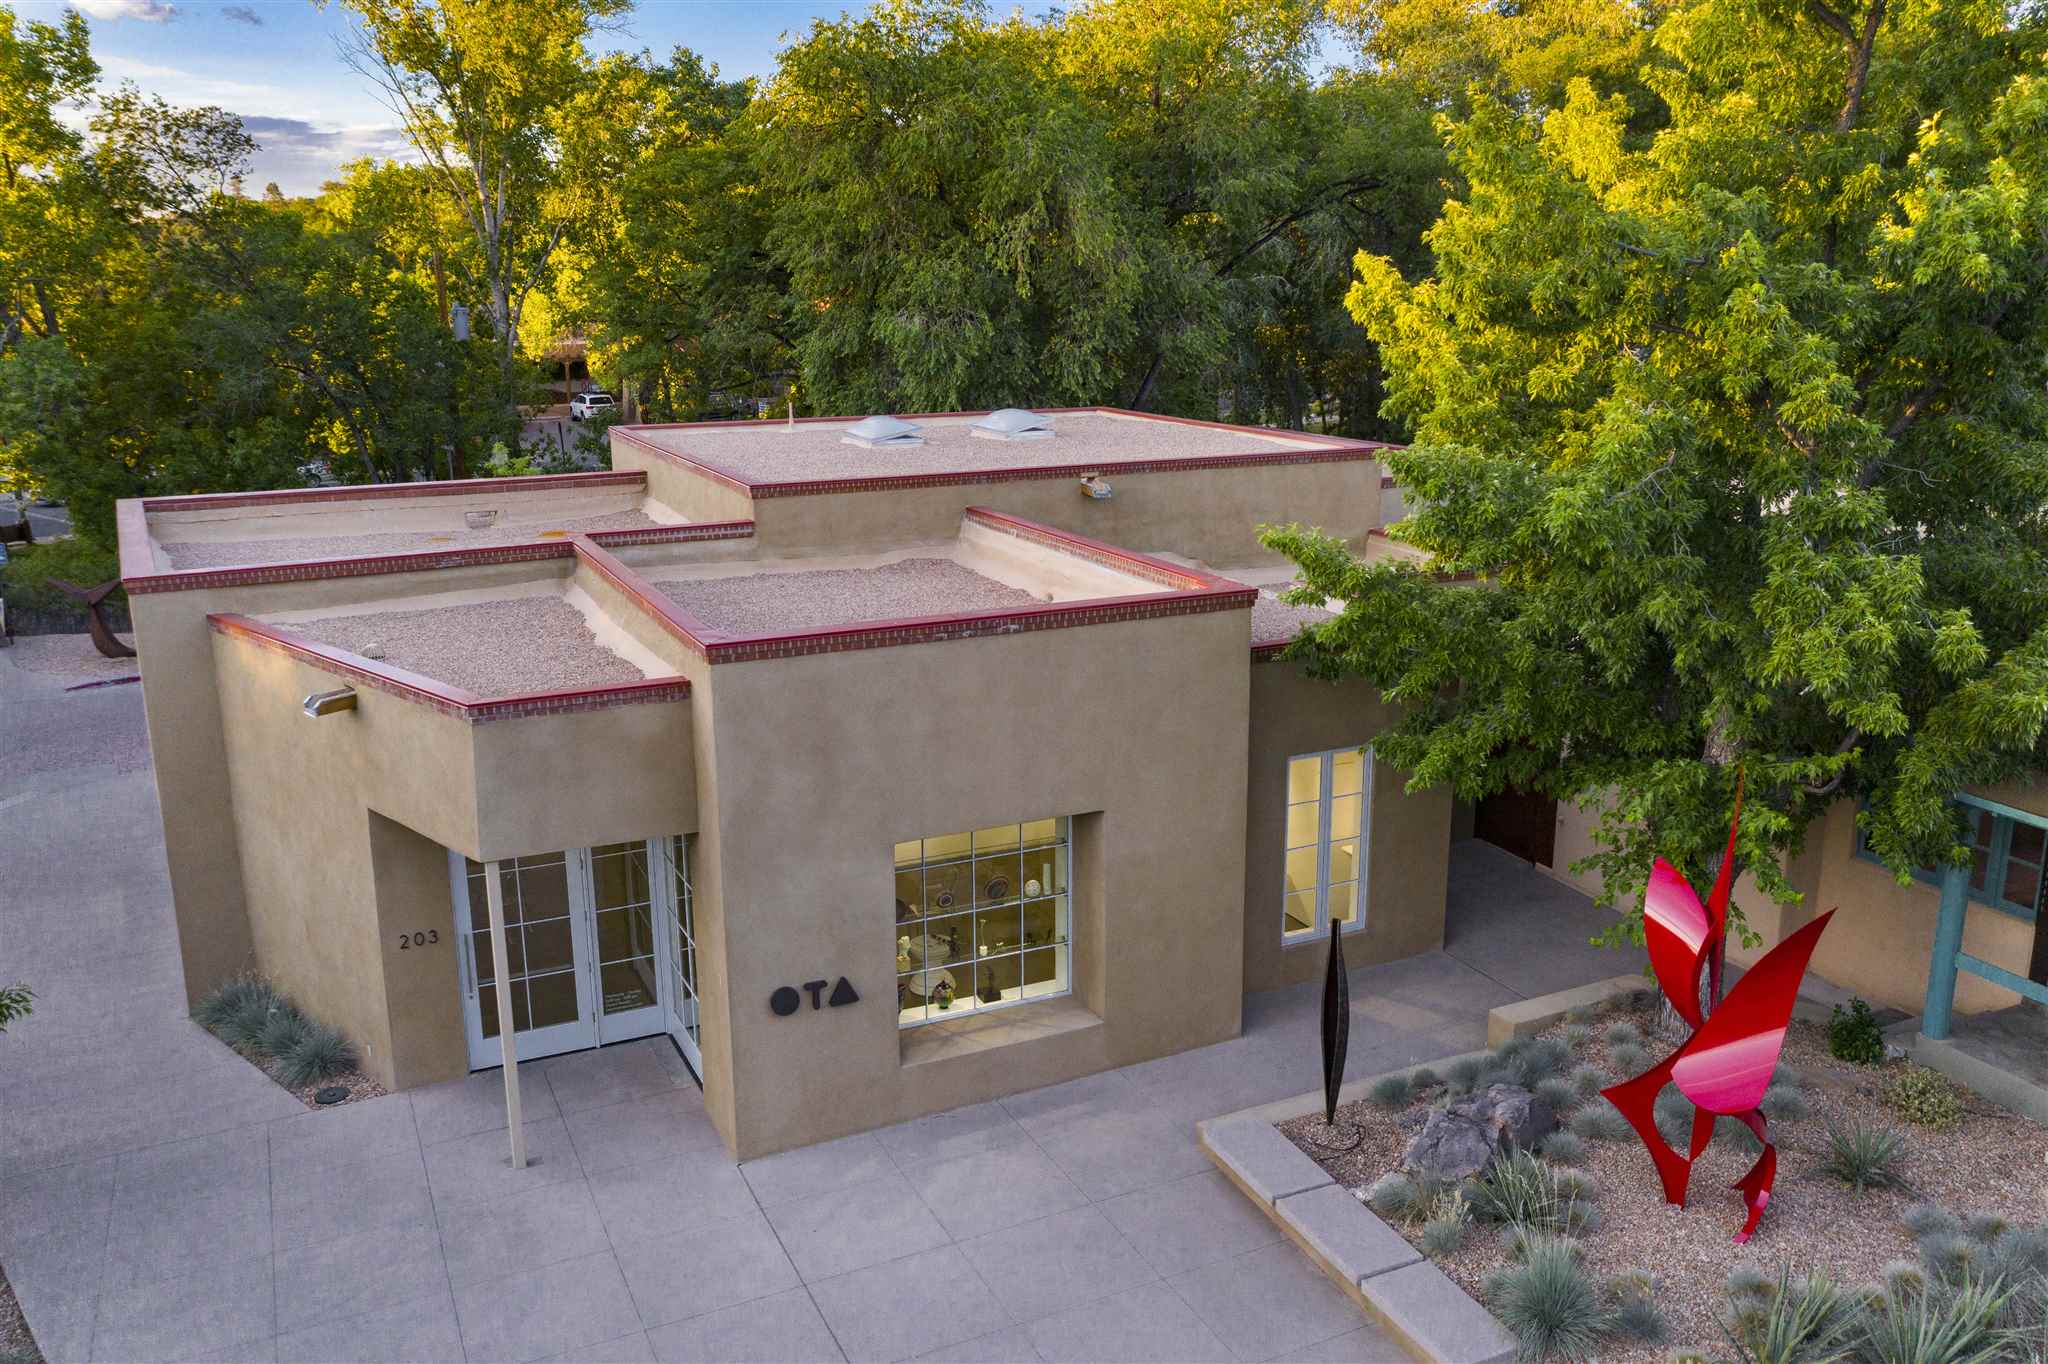 203 Canyon, Santa Fe, New Mexico 87501, ,Commercial Sale,For Sale,203 Canyon,201905227